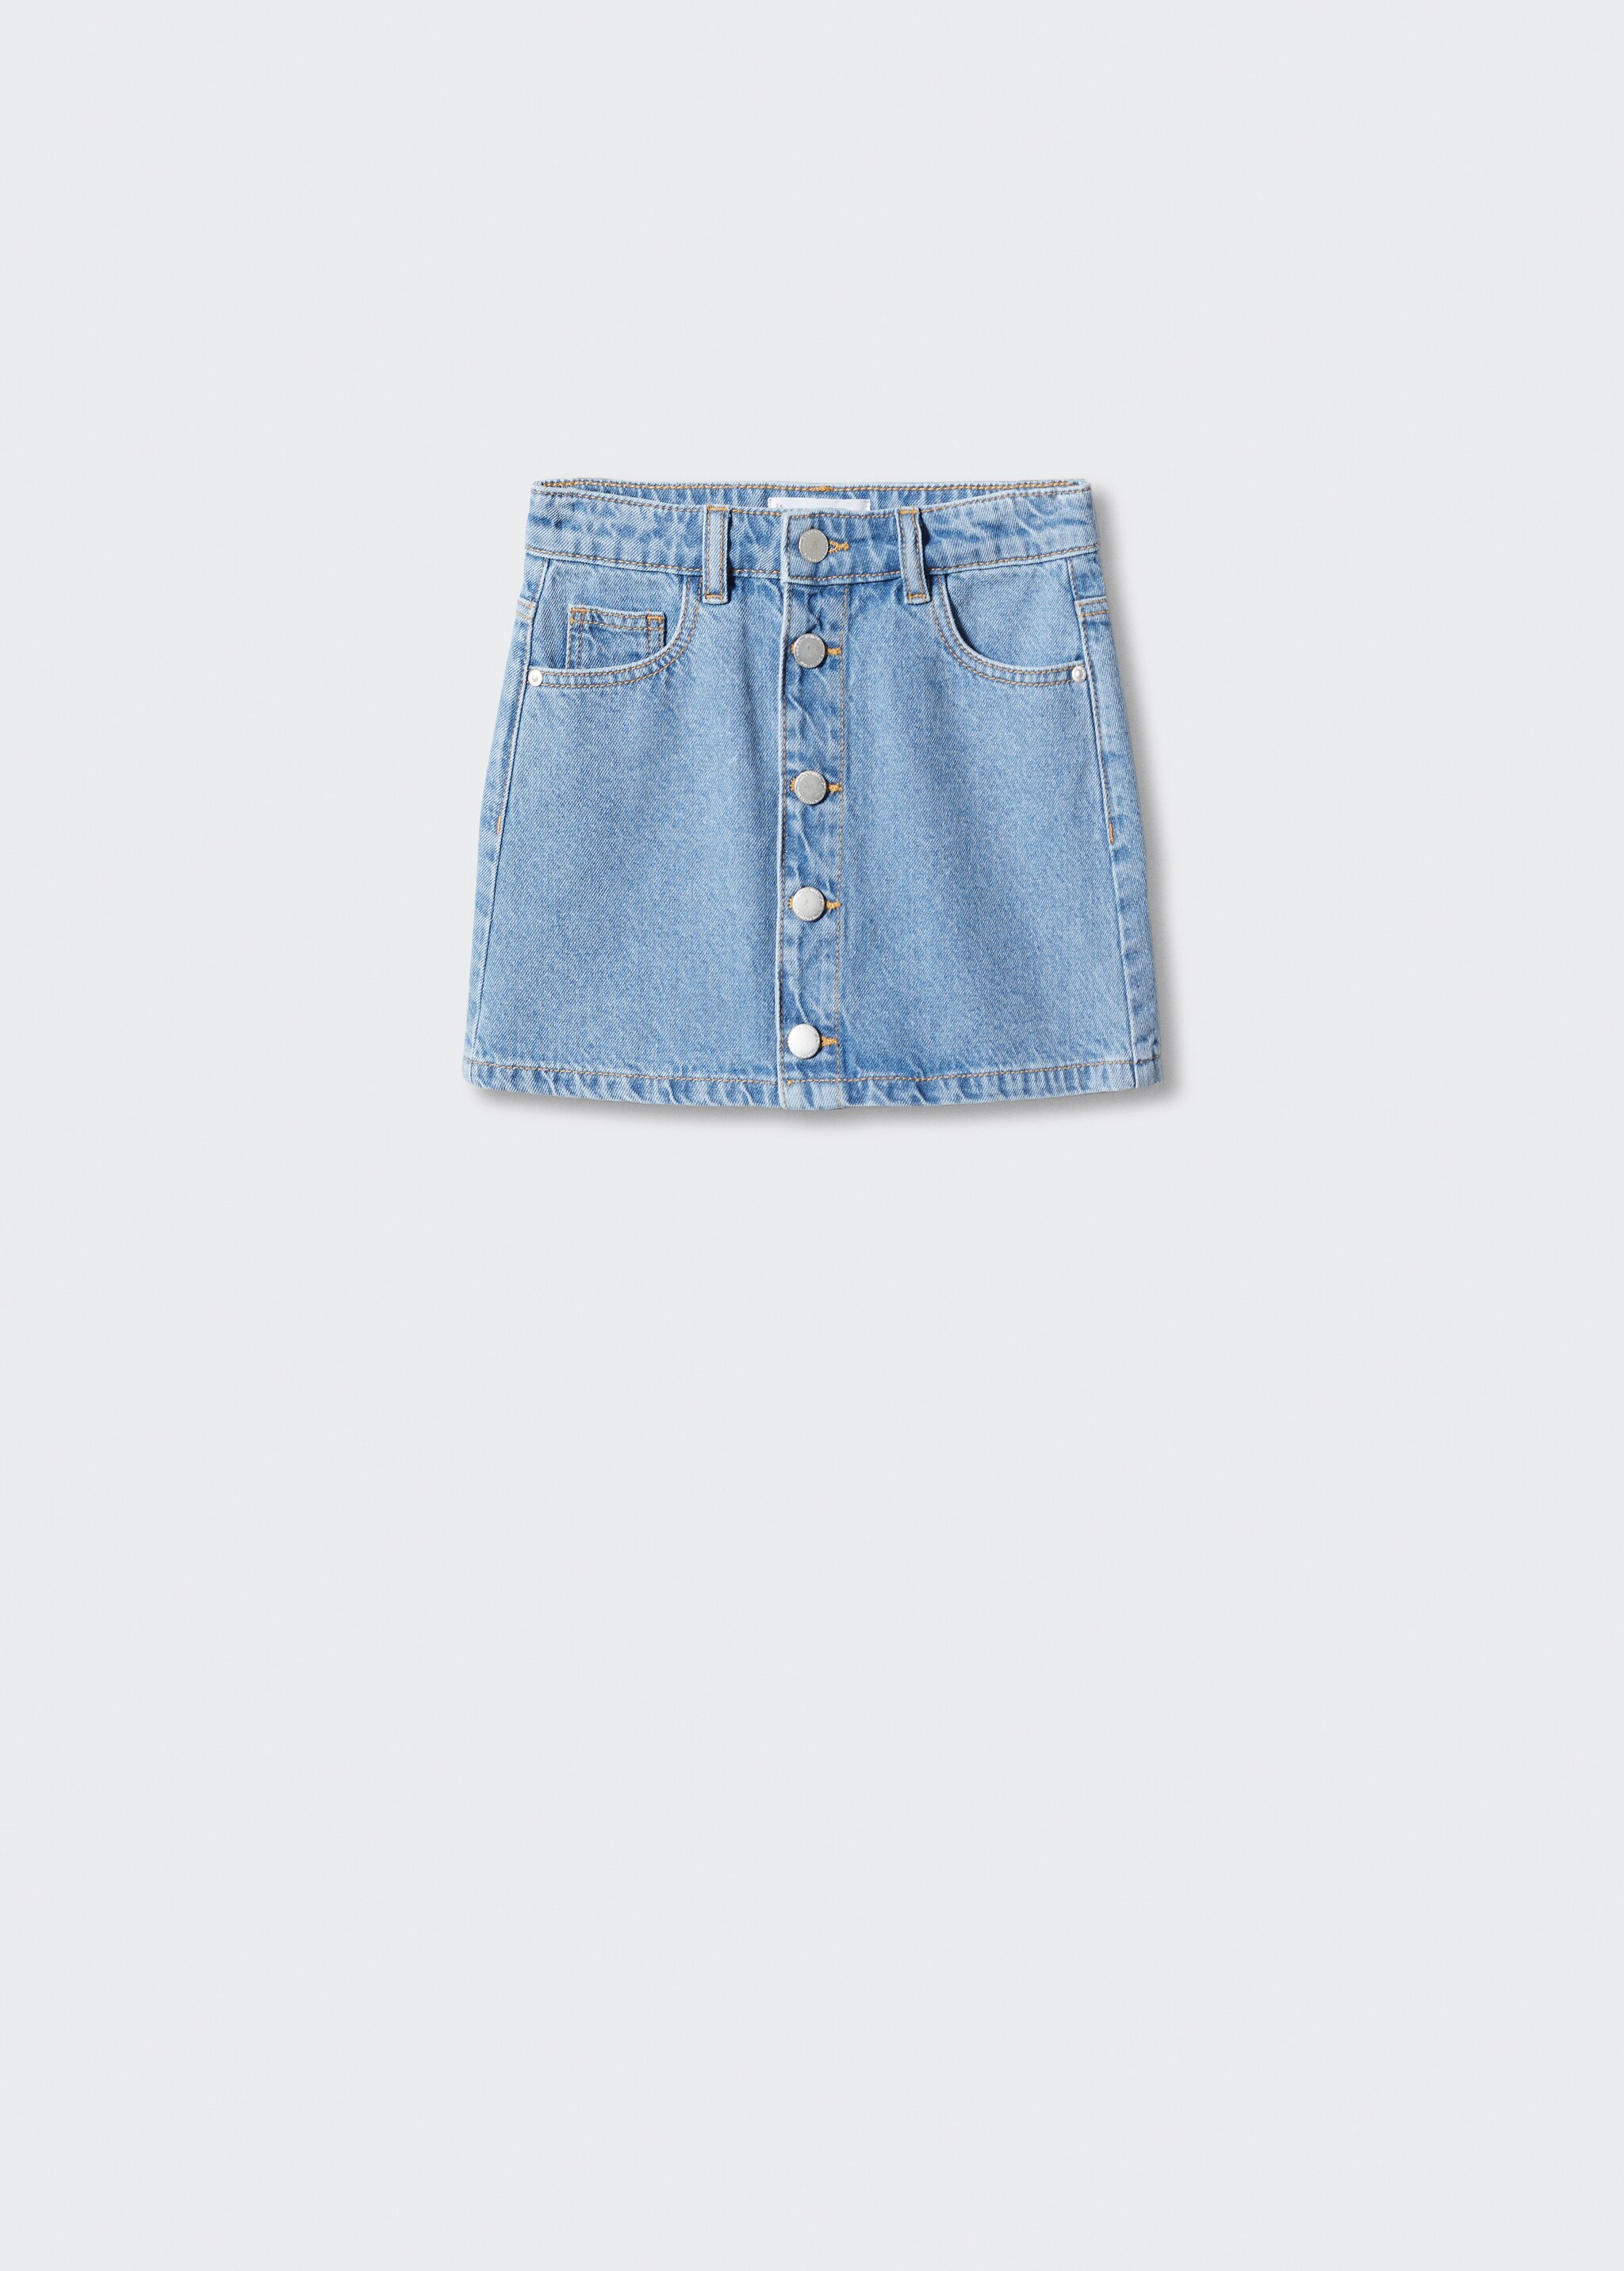 Buttoned denim skirt - Article without model